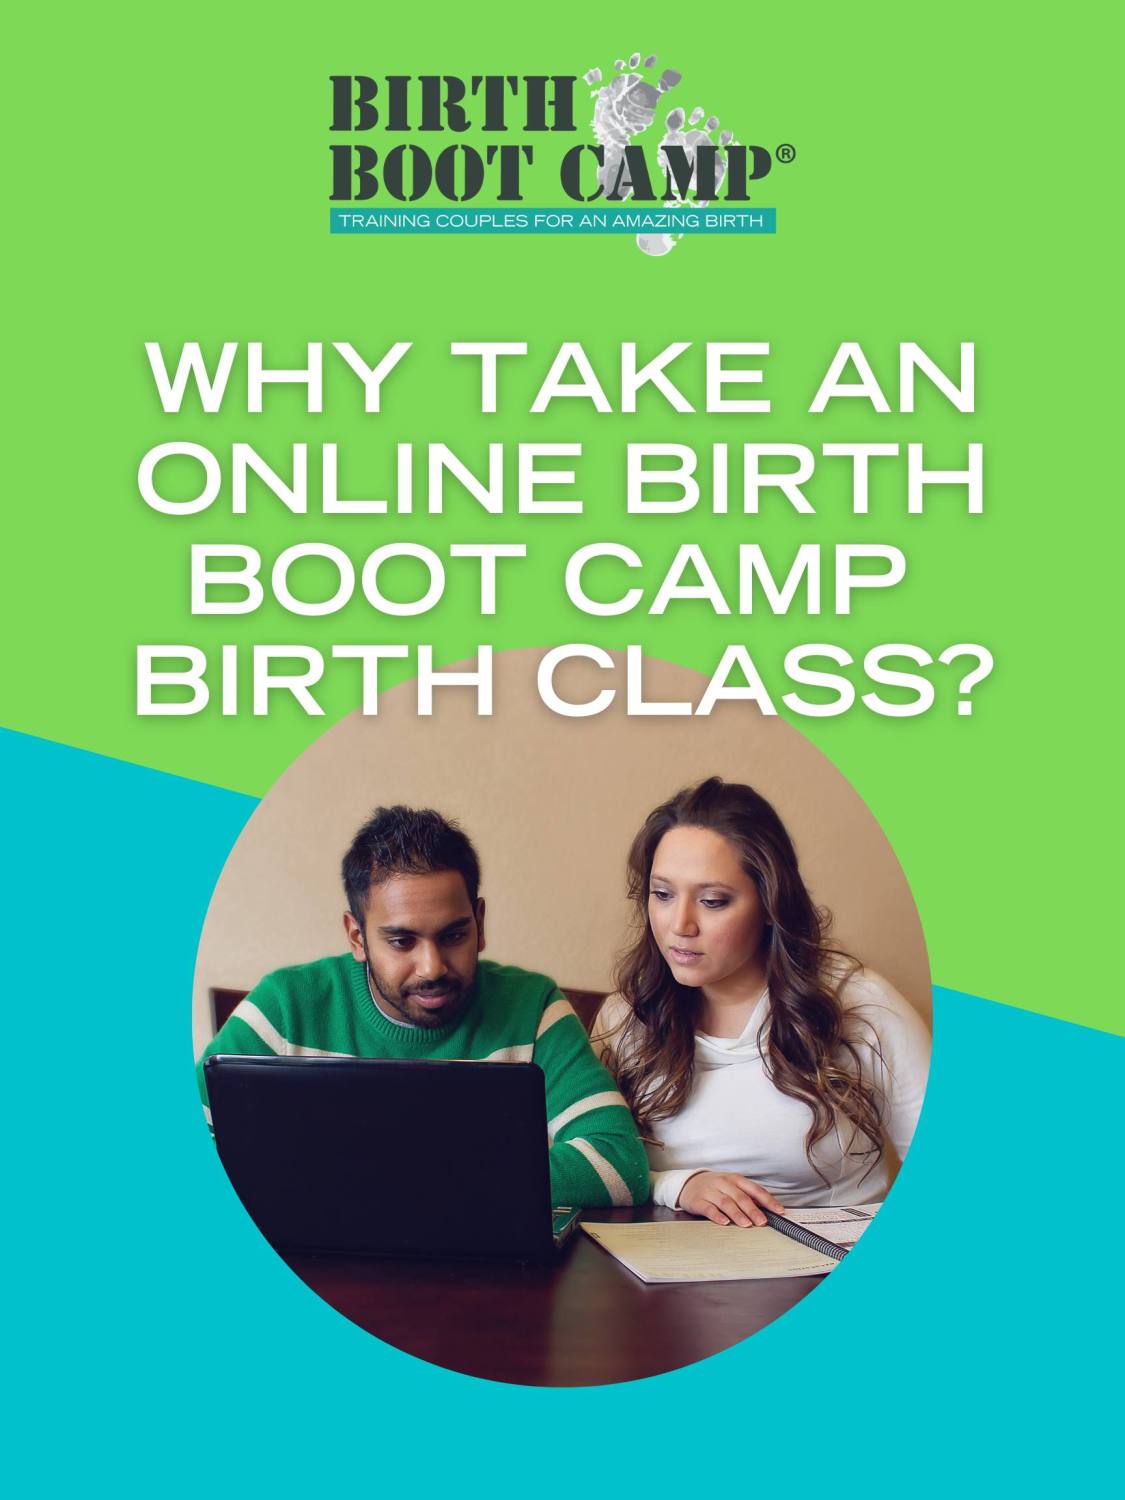 Why Take a Birth Boot Camp Online Birth Class?